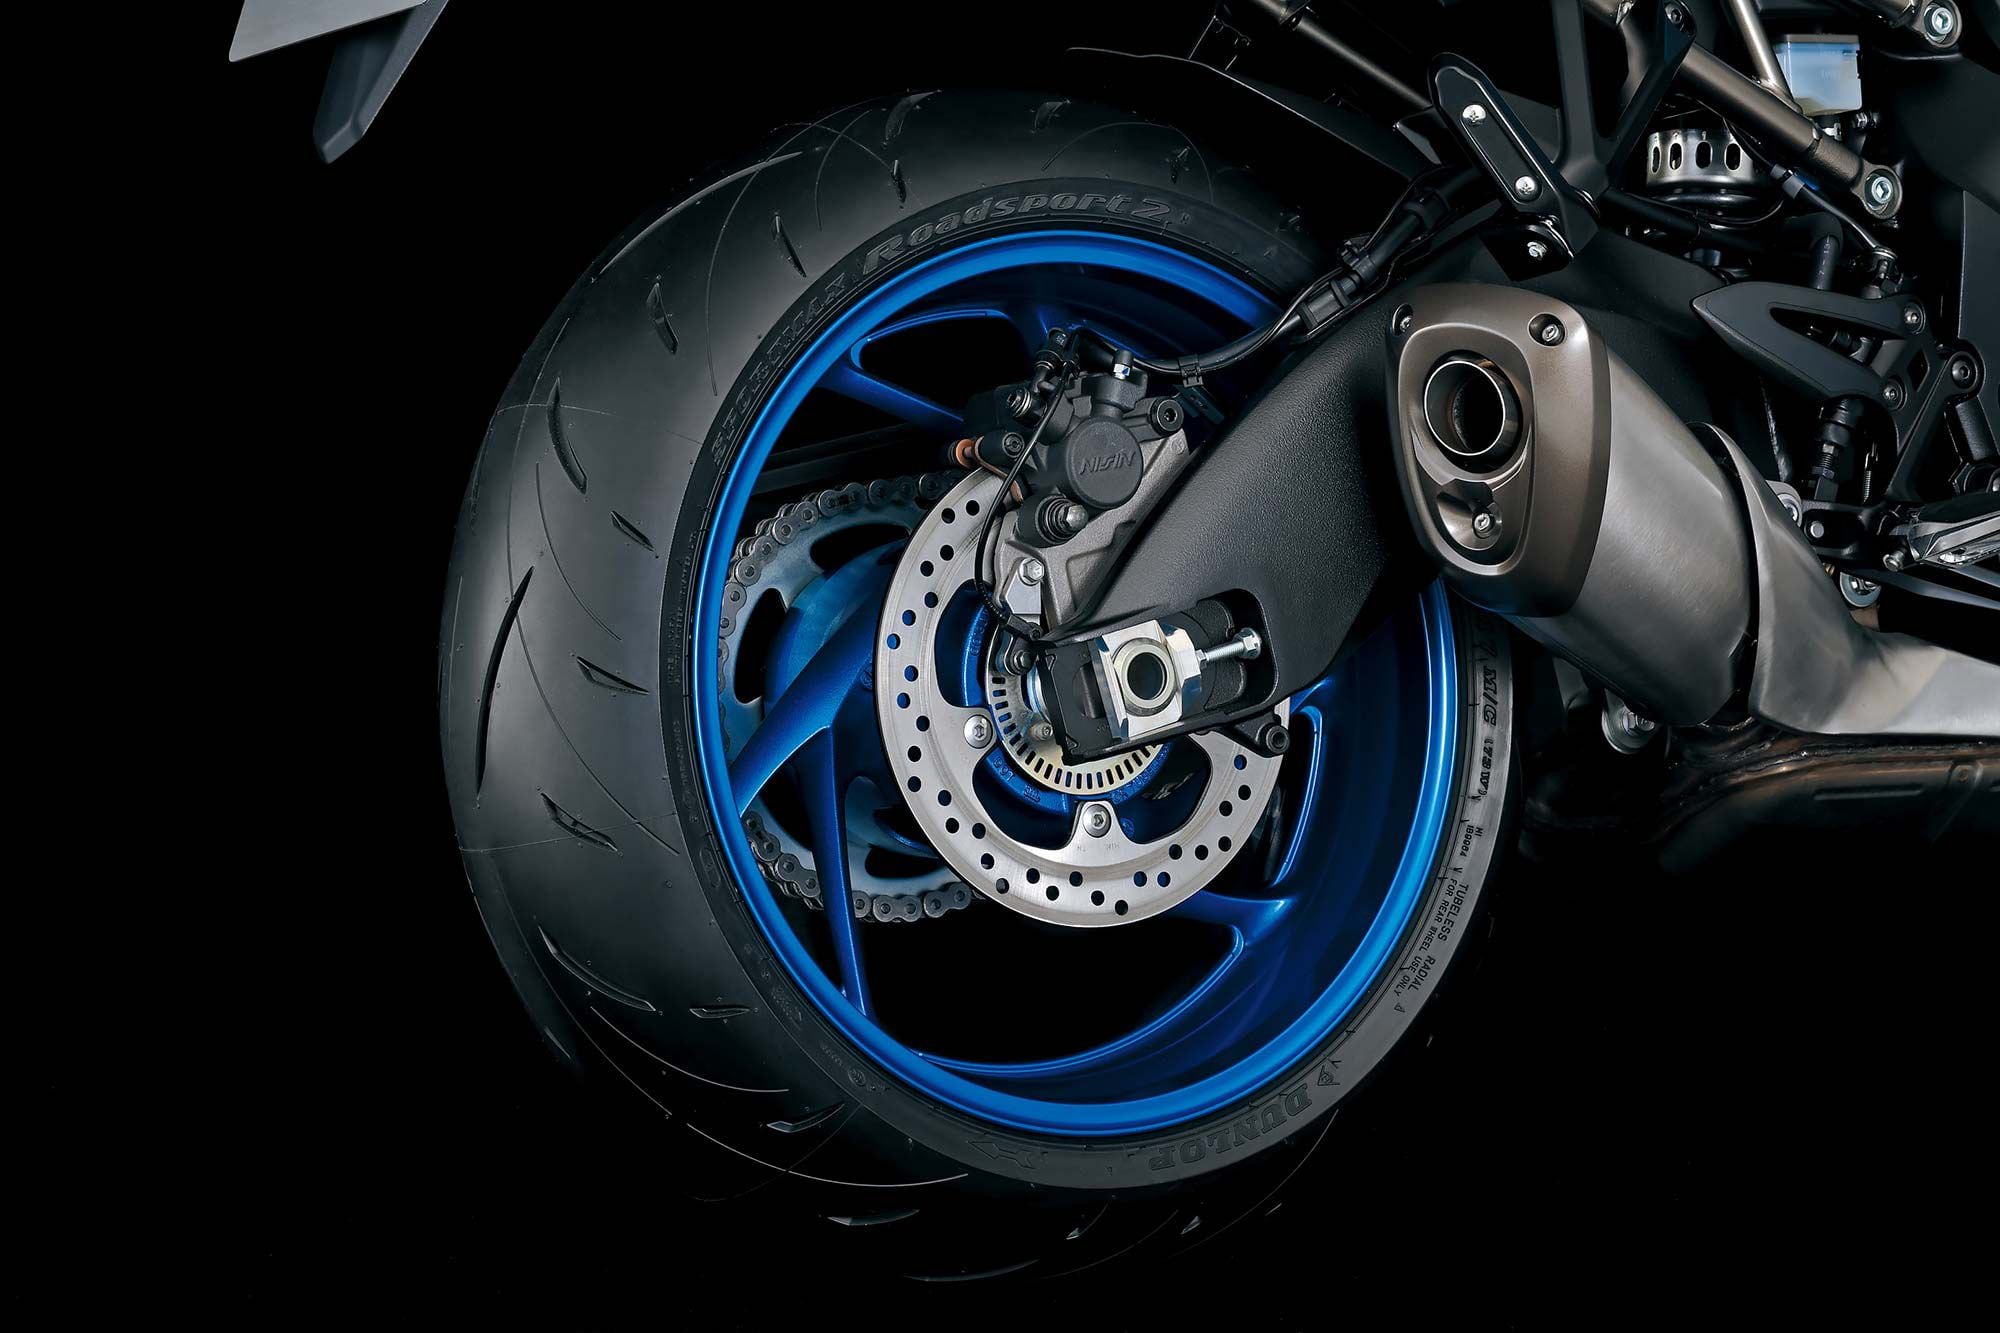 The GSX-S1000GT comes shod with Dunlop Sportmax Roadsport 2 tires as standard equipment.